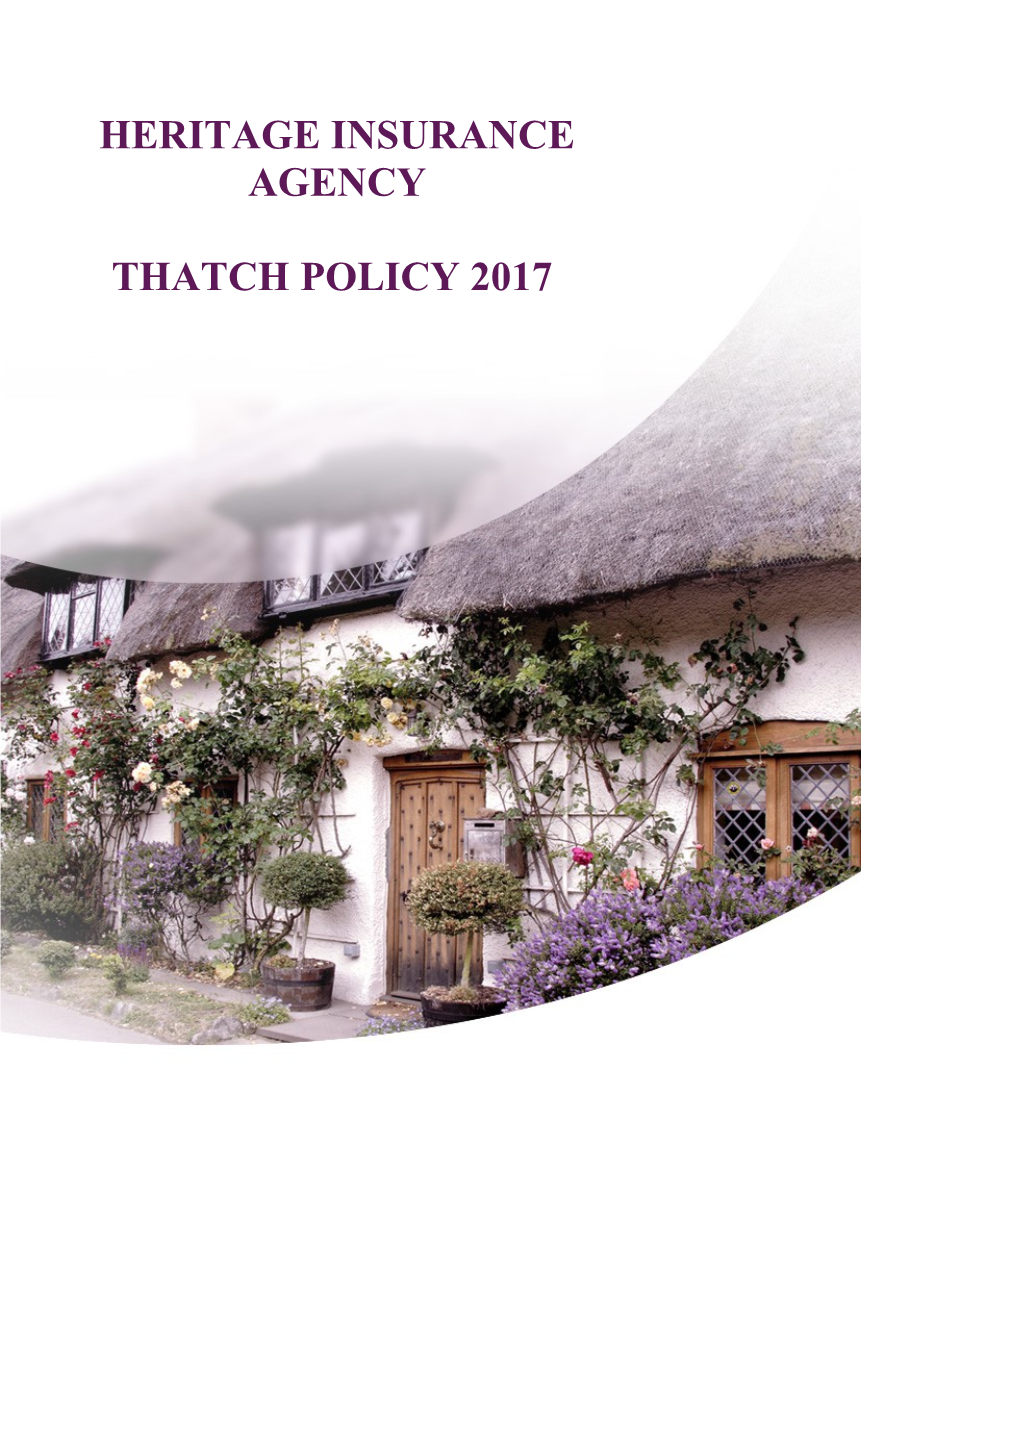 Thatch Policy 2017